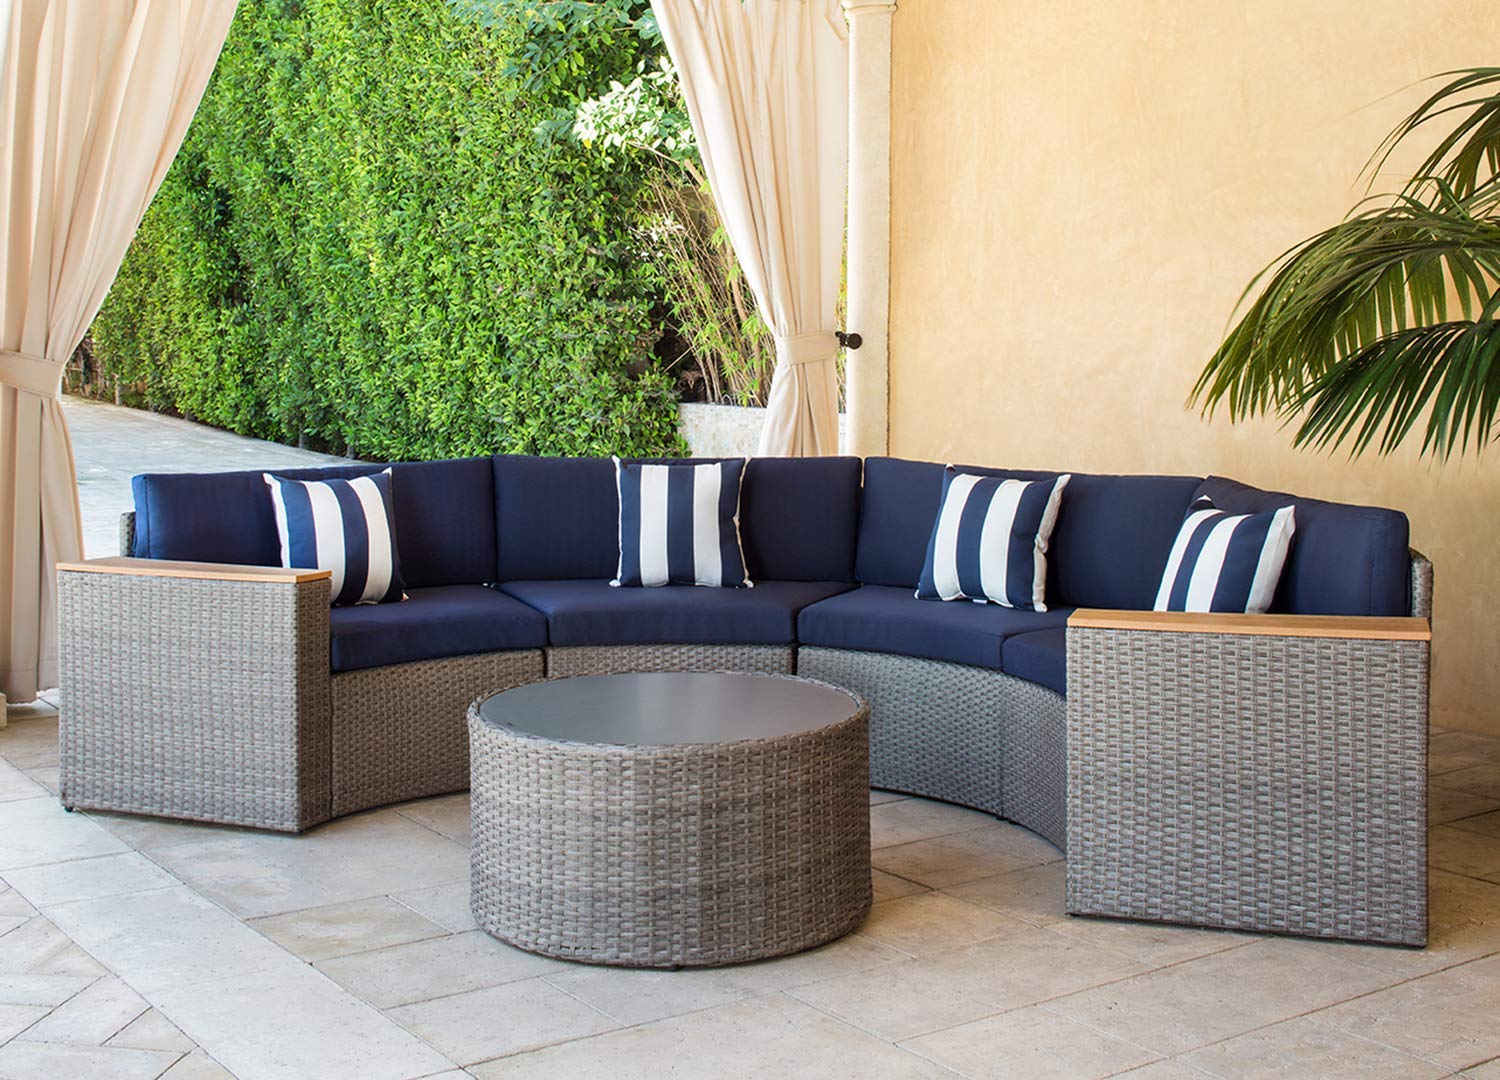 Best Outdoor Furniture Brands for the Perfect Patio Jun 2020